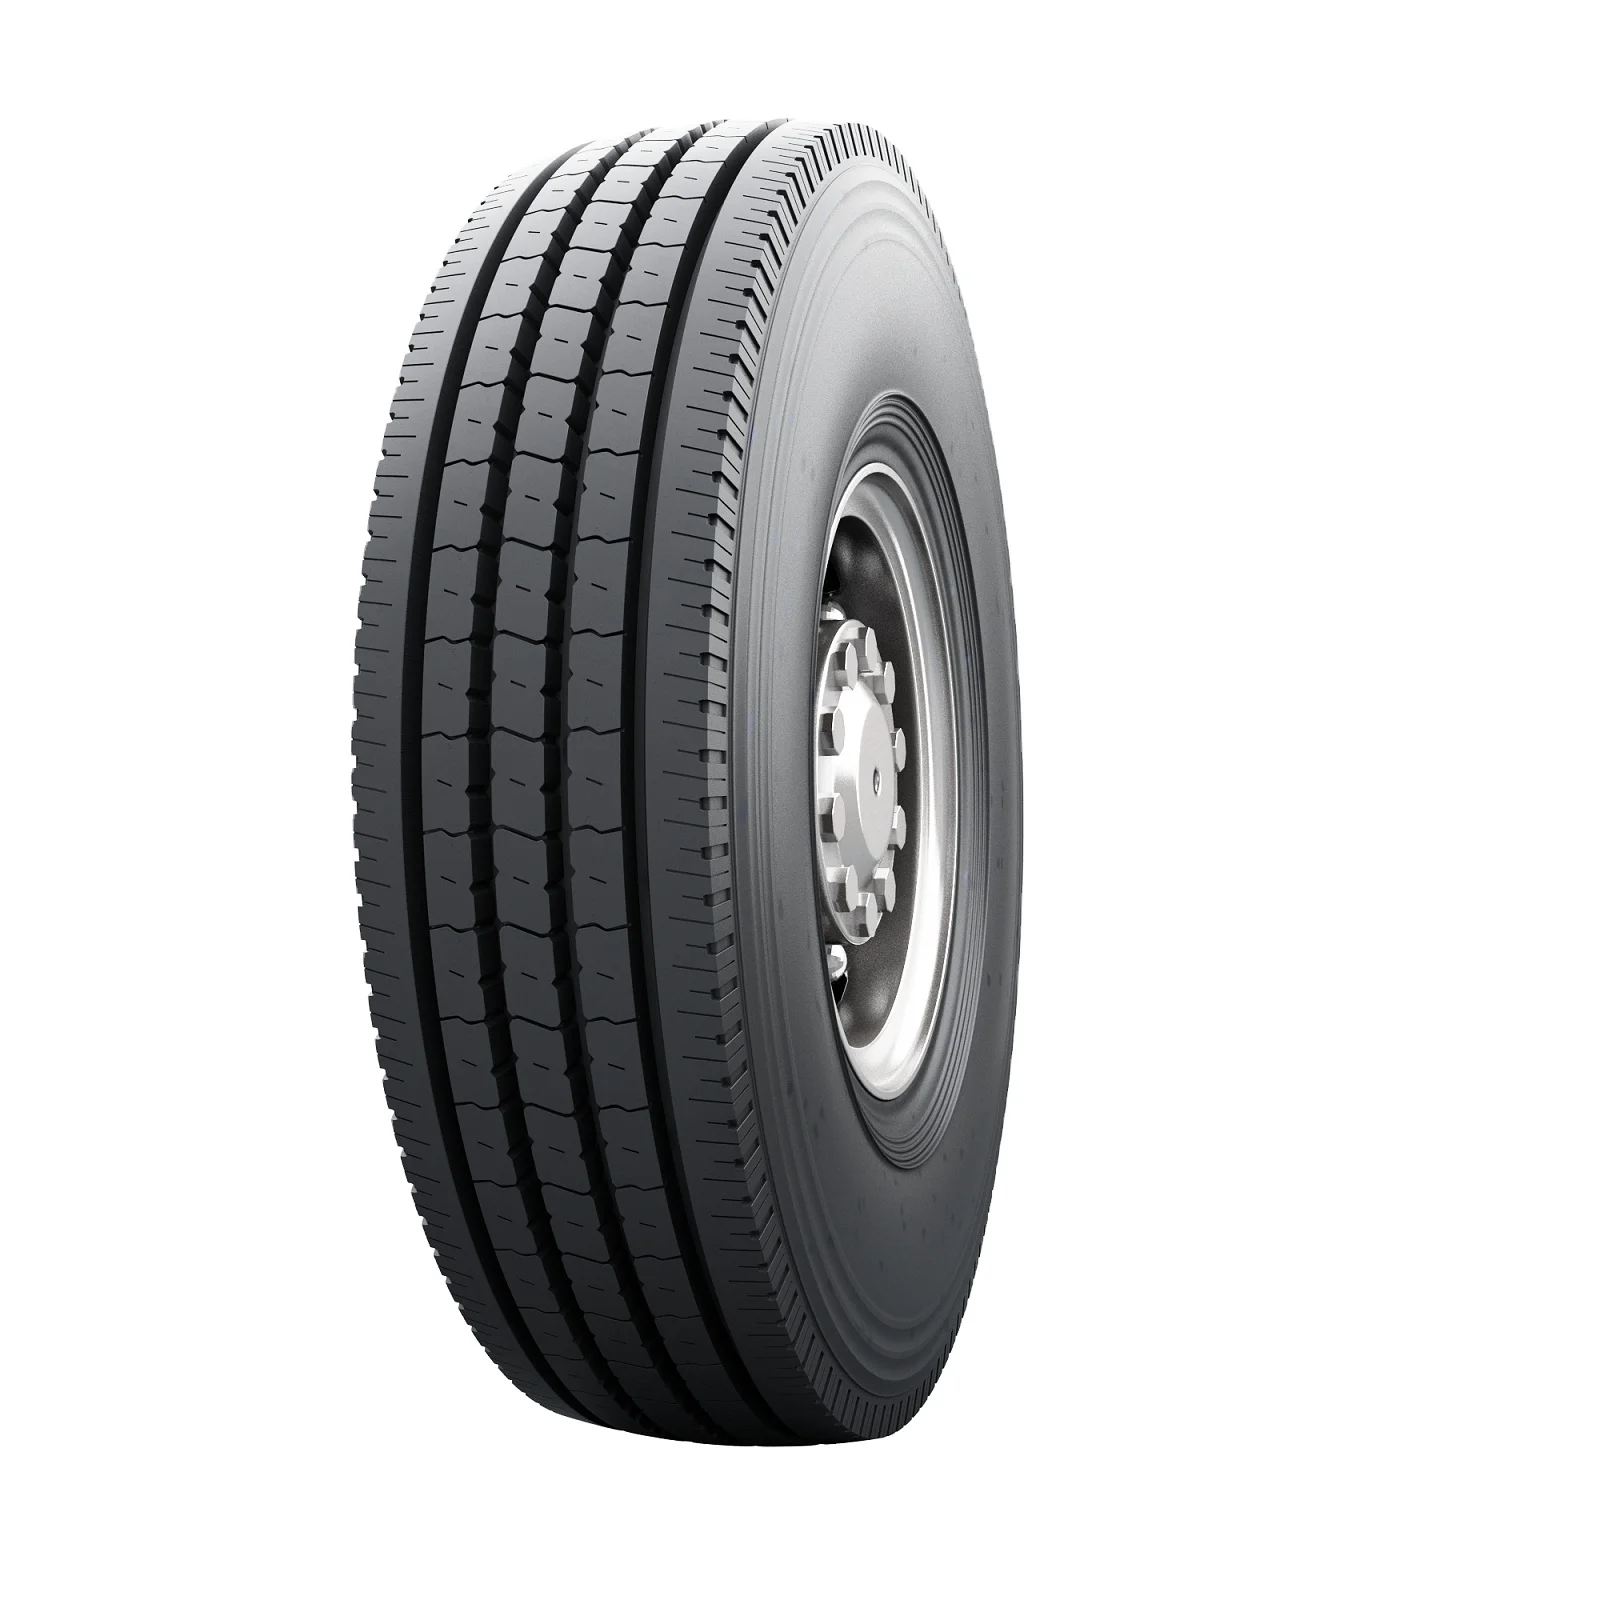 

Chinese TBR Tyre All Steel Radial Truck Tires 445/50R22.5 445/65R22.5 455/45R22.5 355/50R22.5